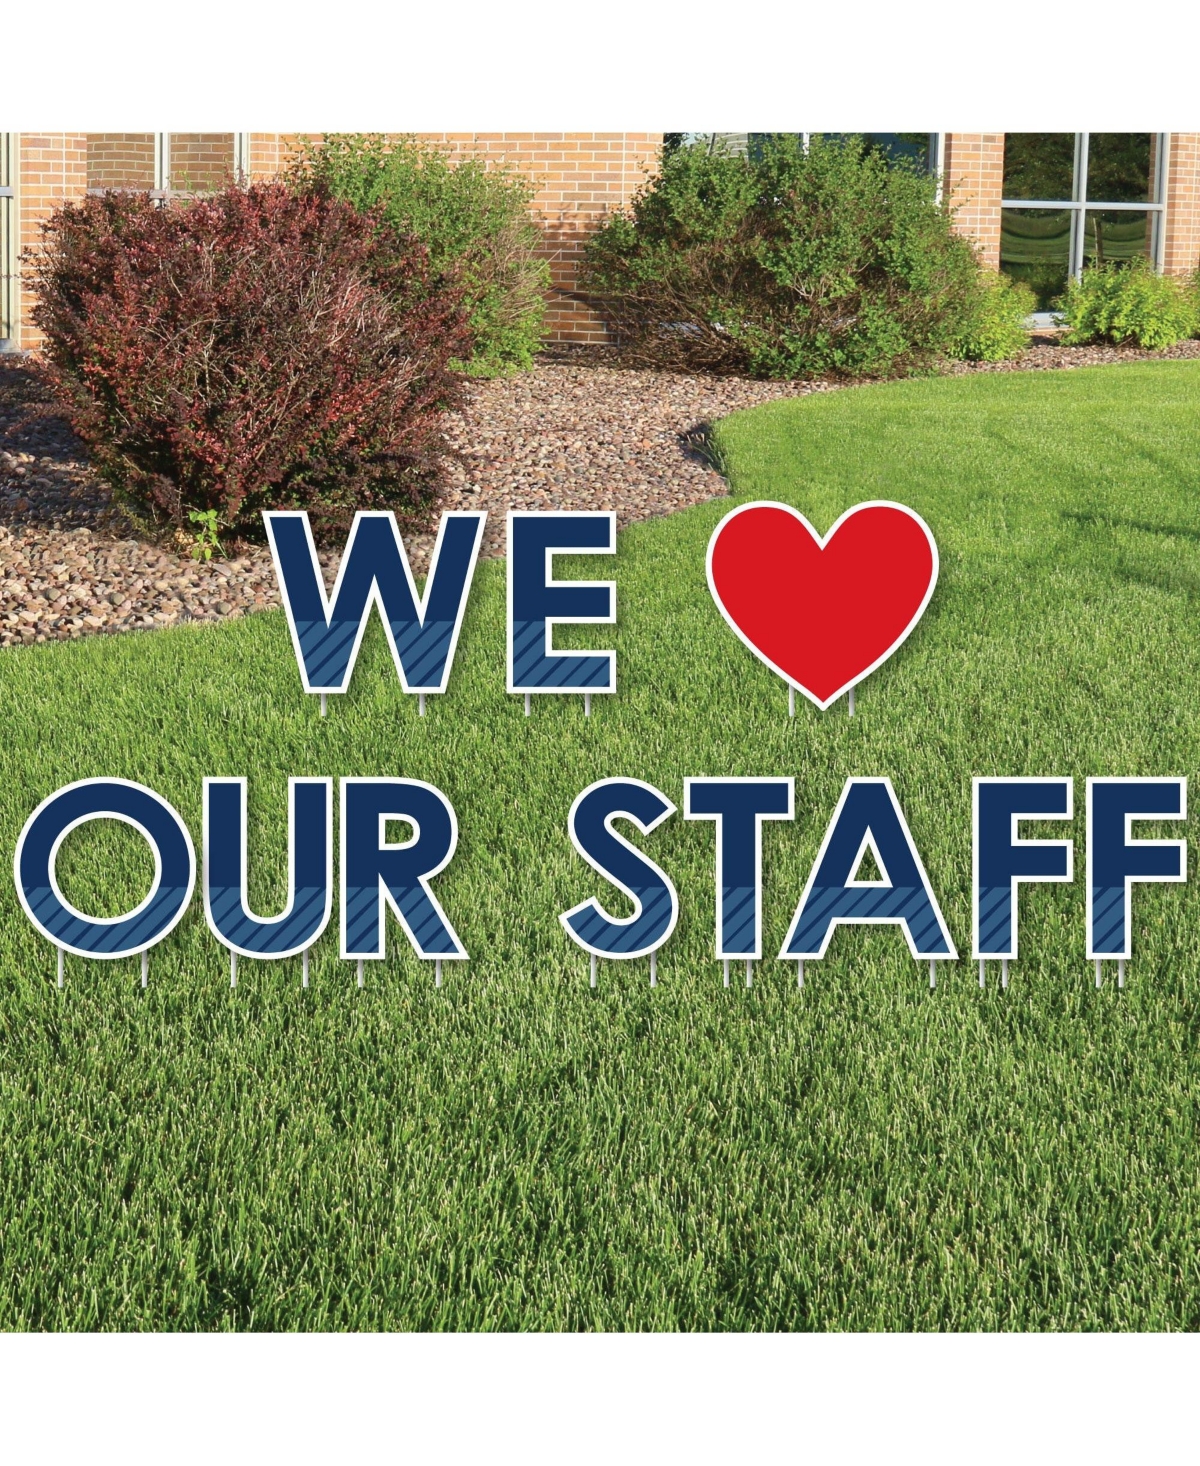 We Love Our Staff - Outdoor Lawn Decor - Yard Signs - We Love Our Staff